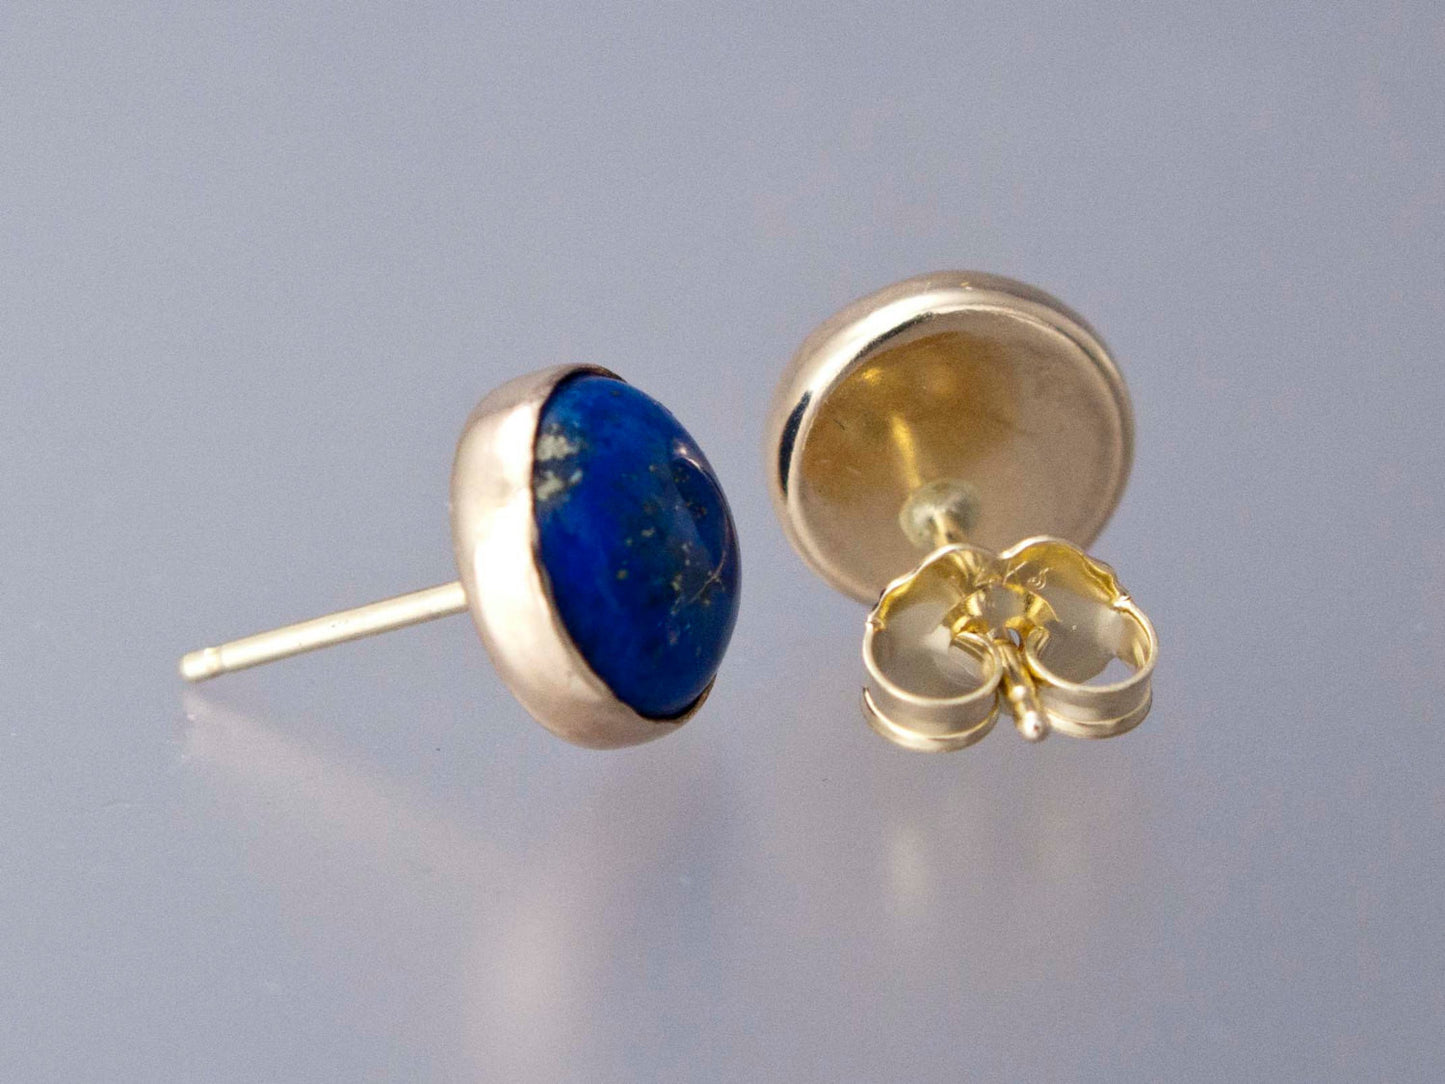 Lapis Lazuli Gold Stud Earrings - 8mm solid 14k gold settings, posts and backs